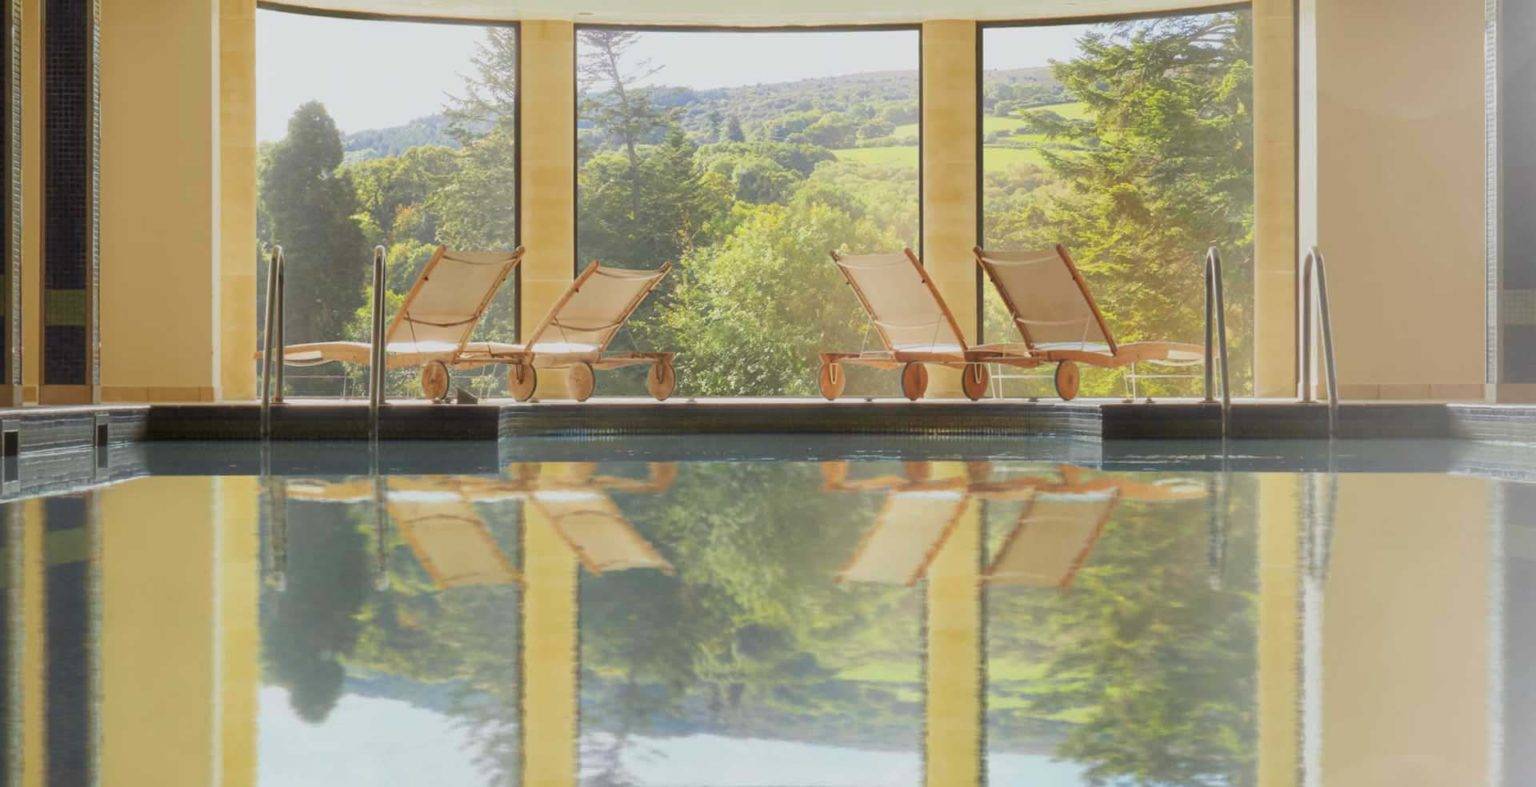 Indoor pool with lounge chairs at the Bovey Castle Spa